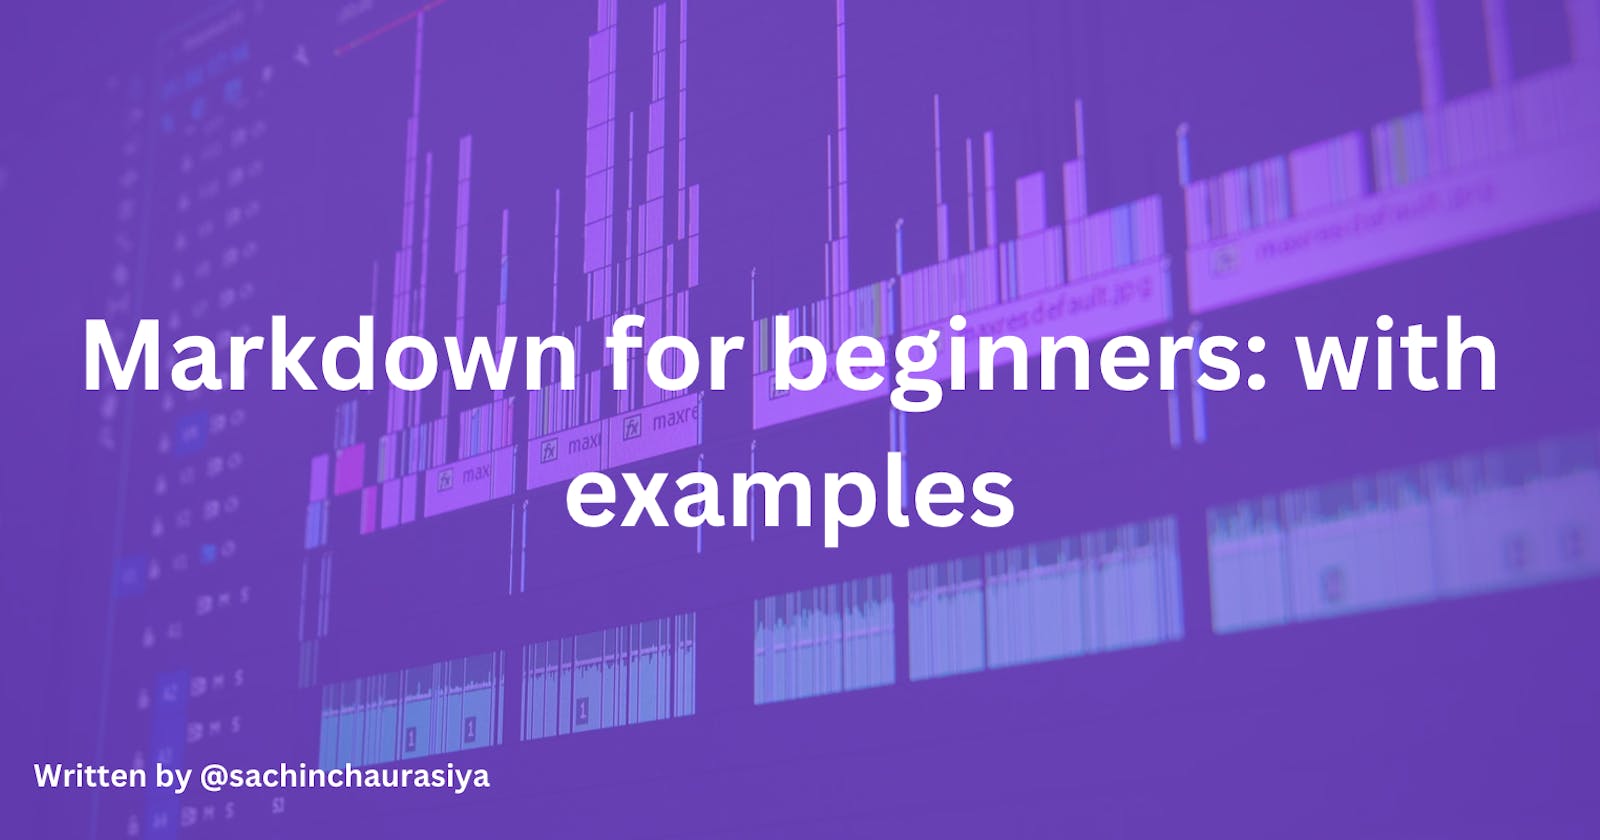 Markdown for beginners: with examples